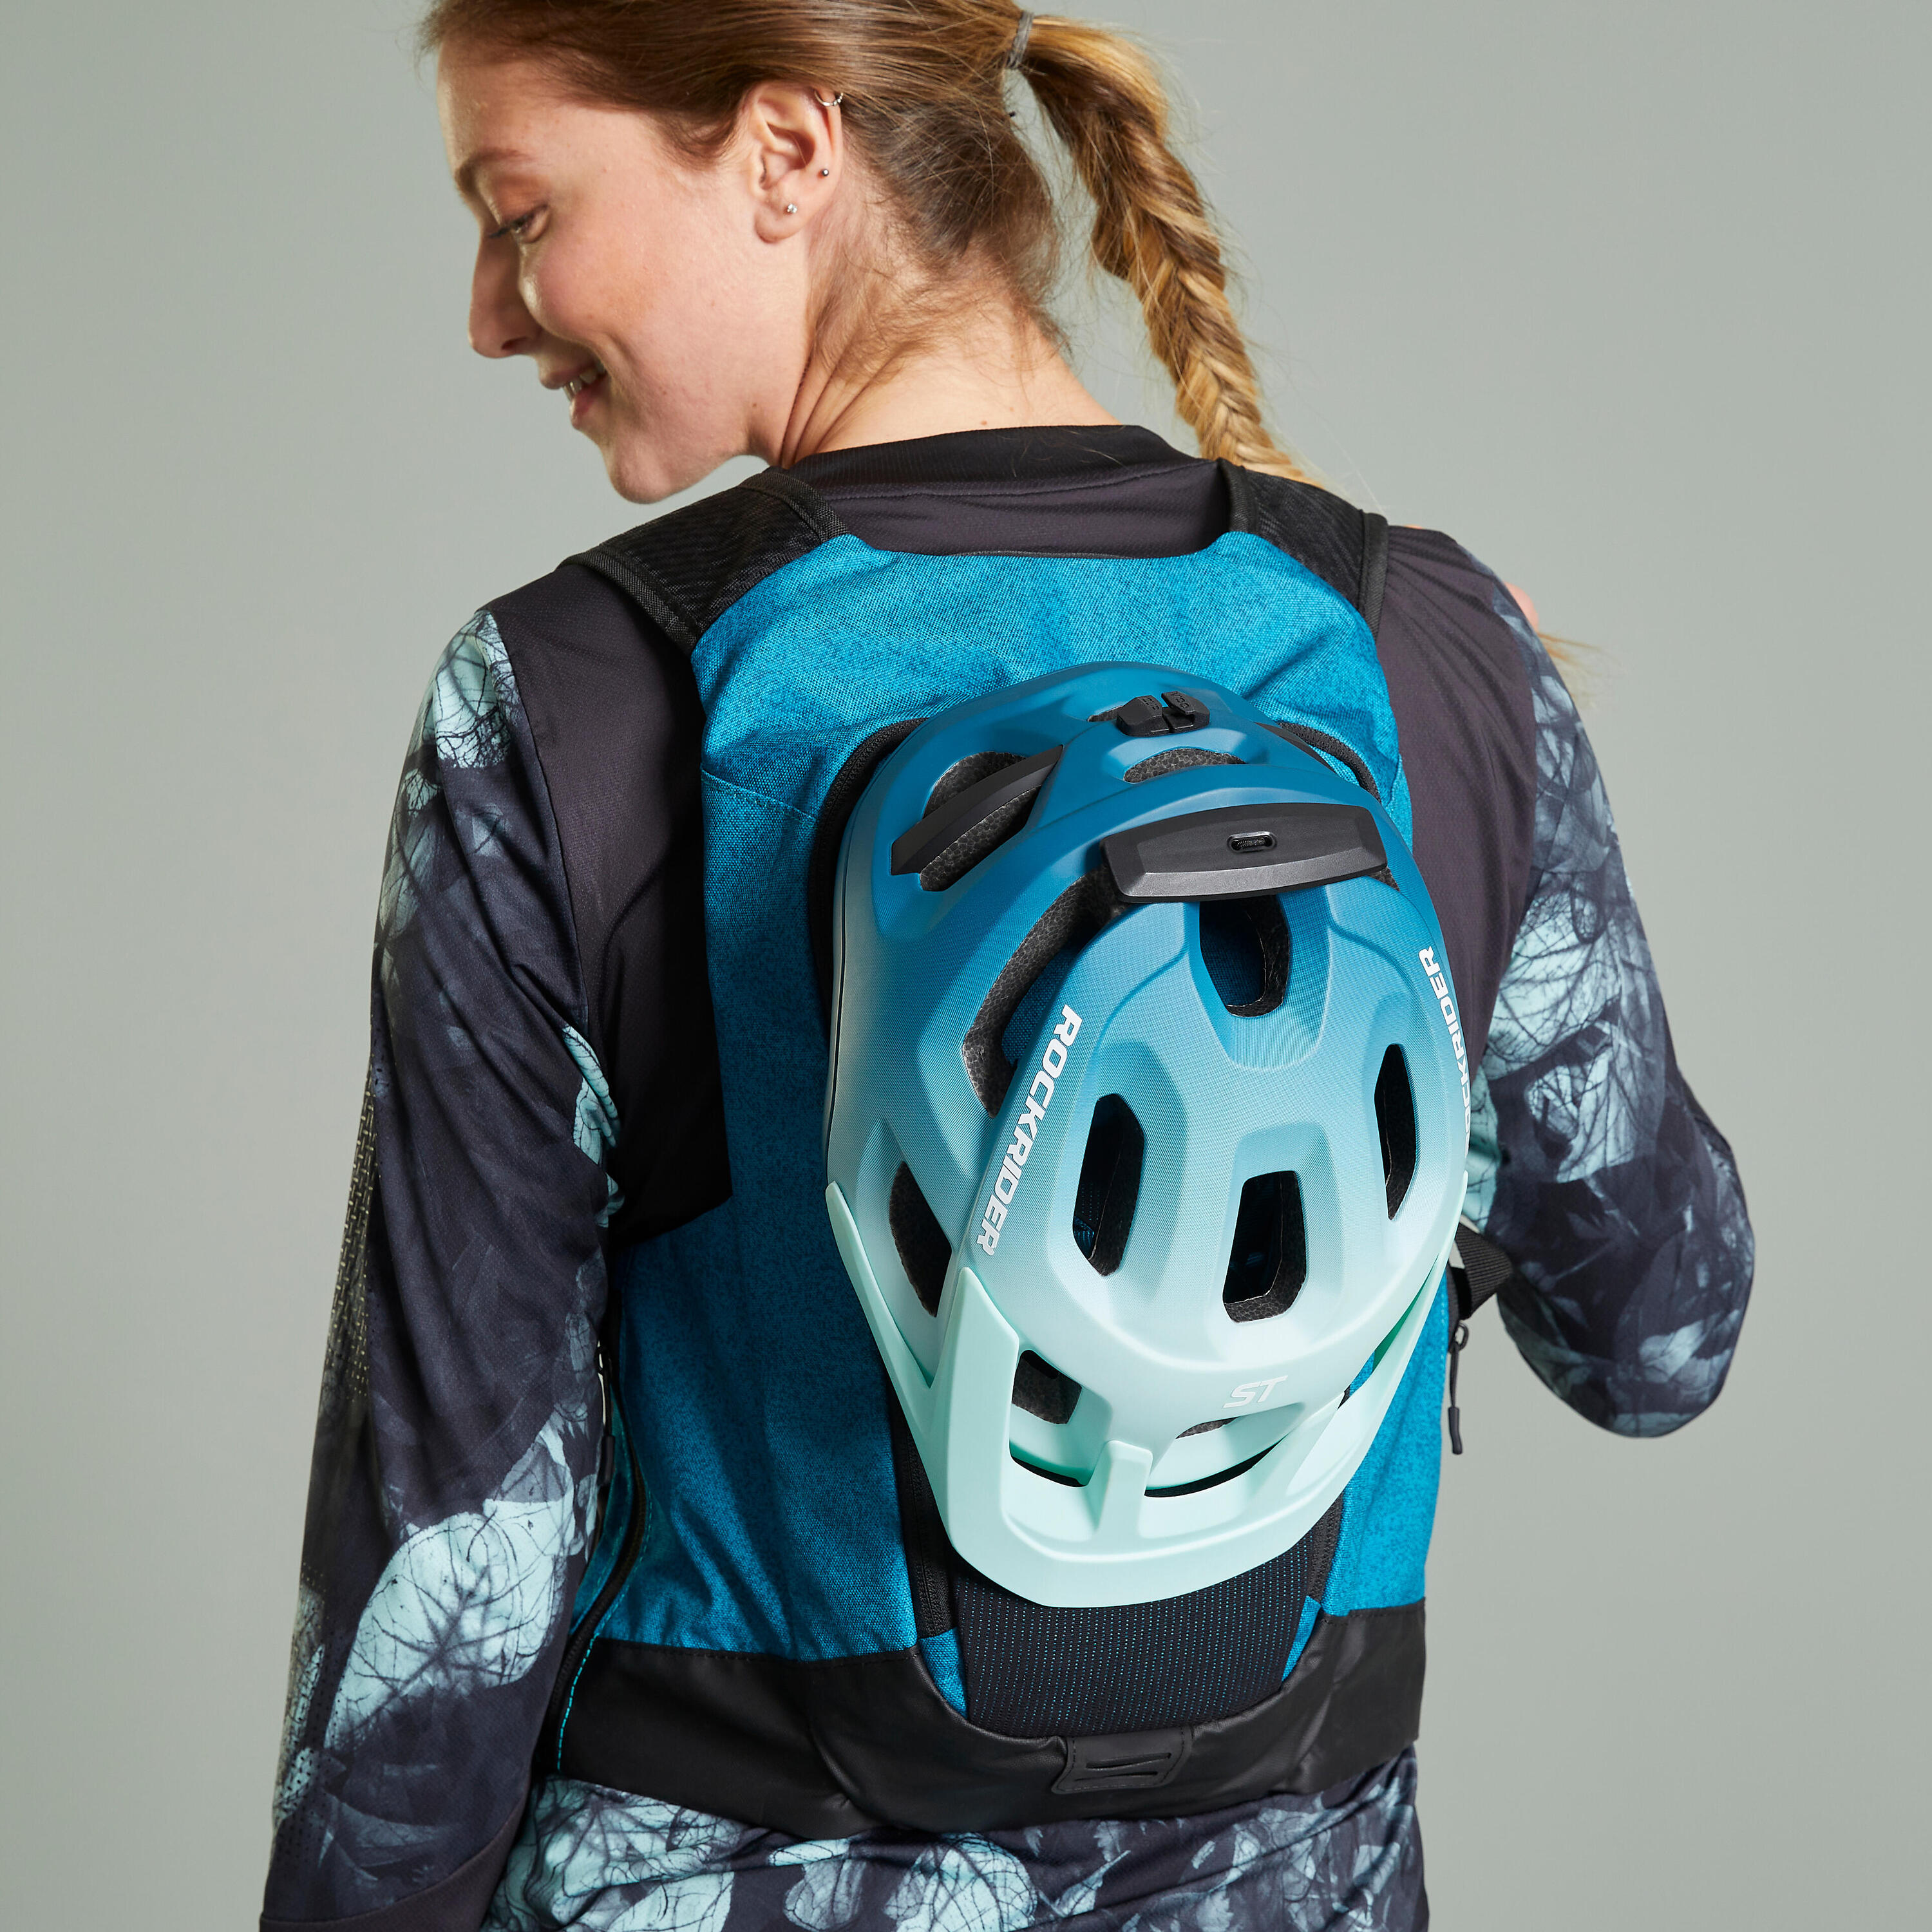 Mountain Bike Hydration Backpack Explore 7L/2L Water - Turquoise Blue 18/18